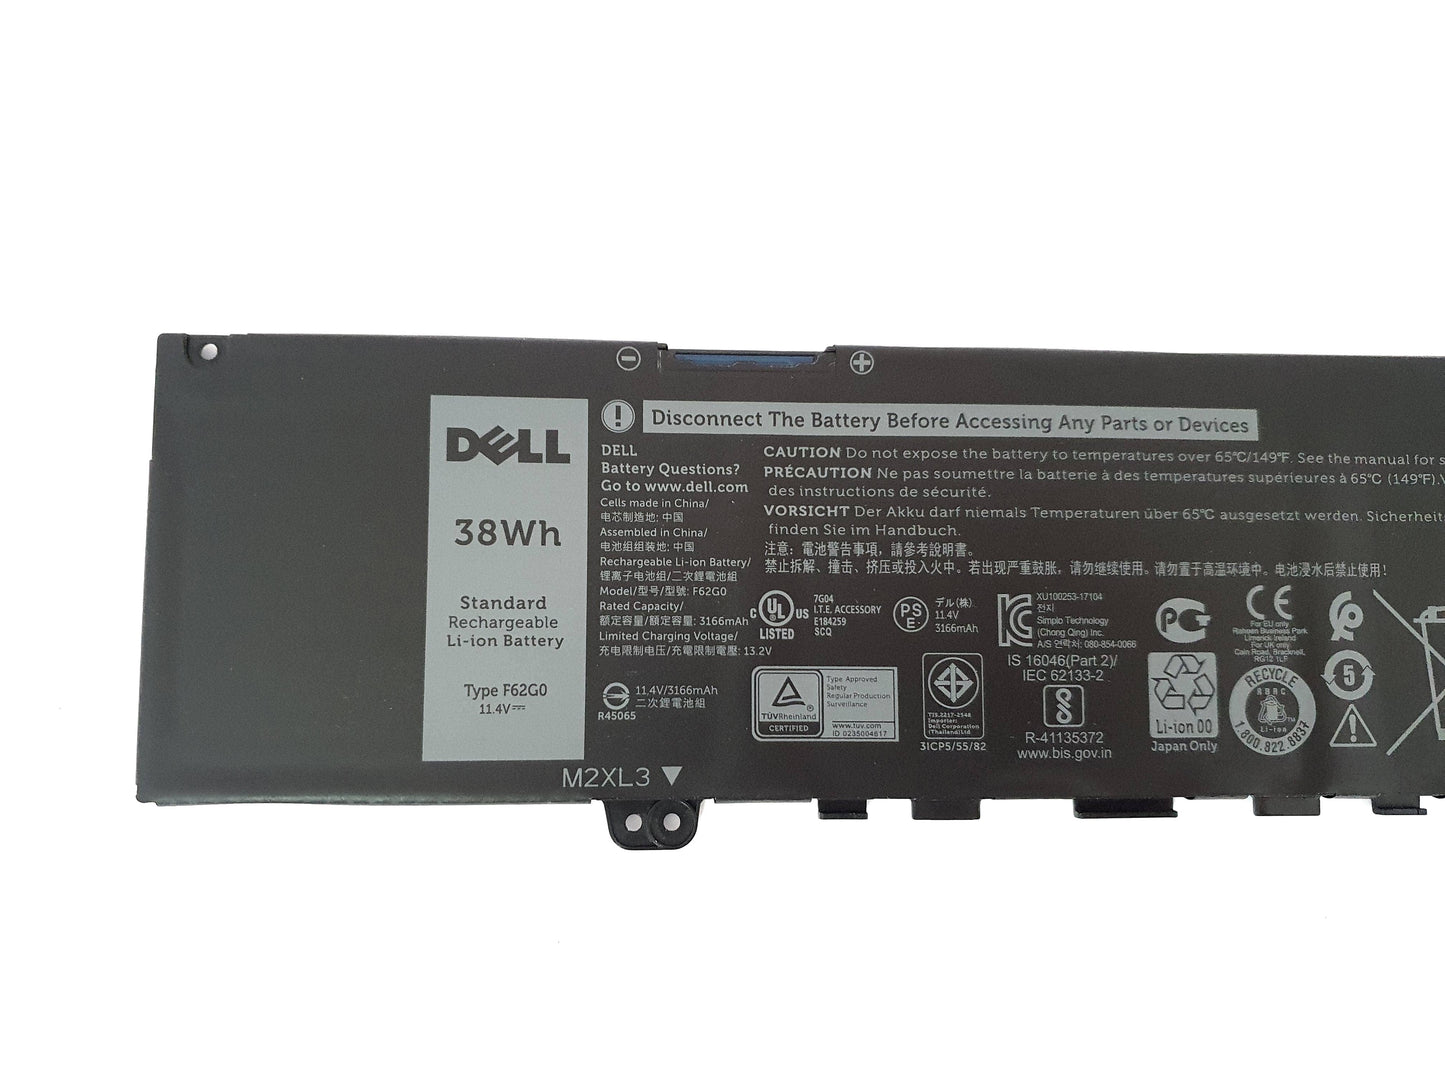 Dell Inspiron 13 5370 7370 7373 7386 Laptop Battery 38Wh 3-Cell 39DY5 RPJC3 F62G0 | Black Cat PC